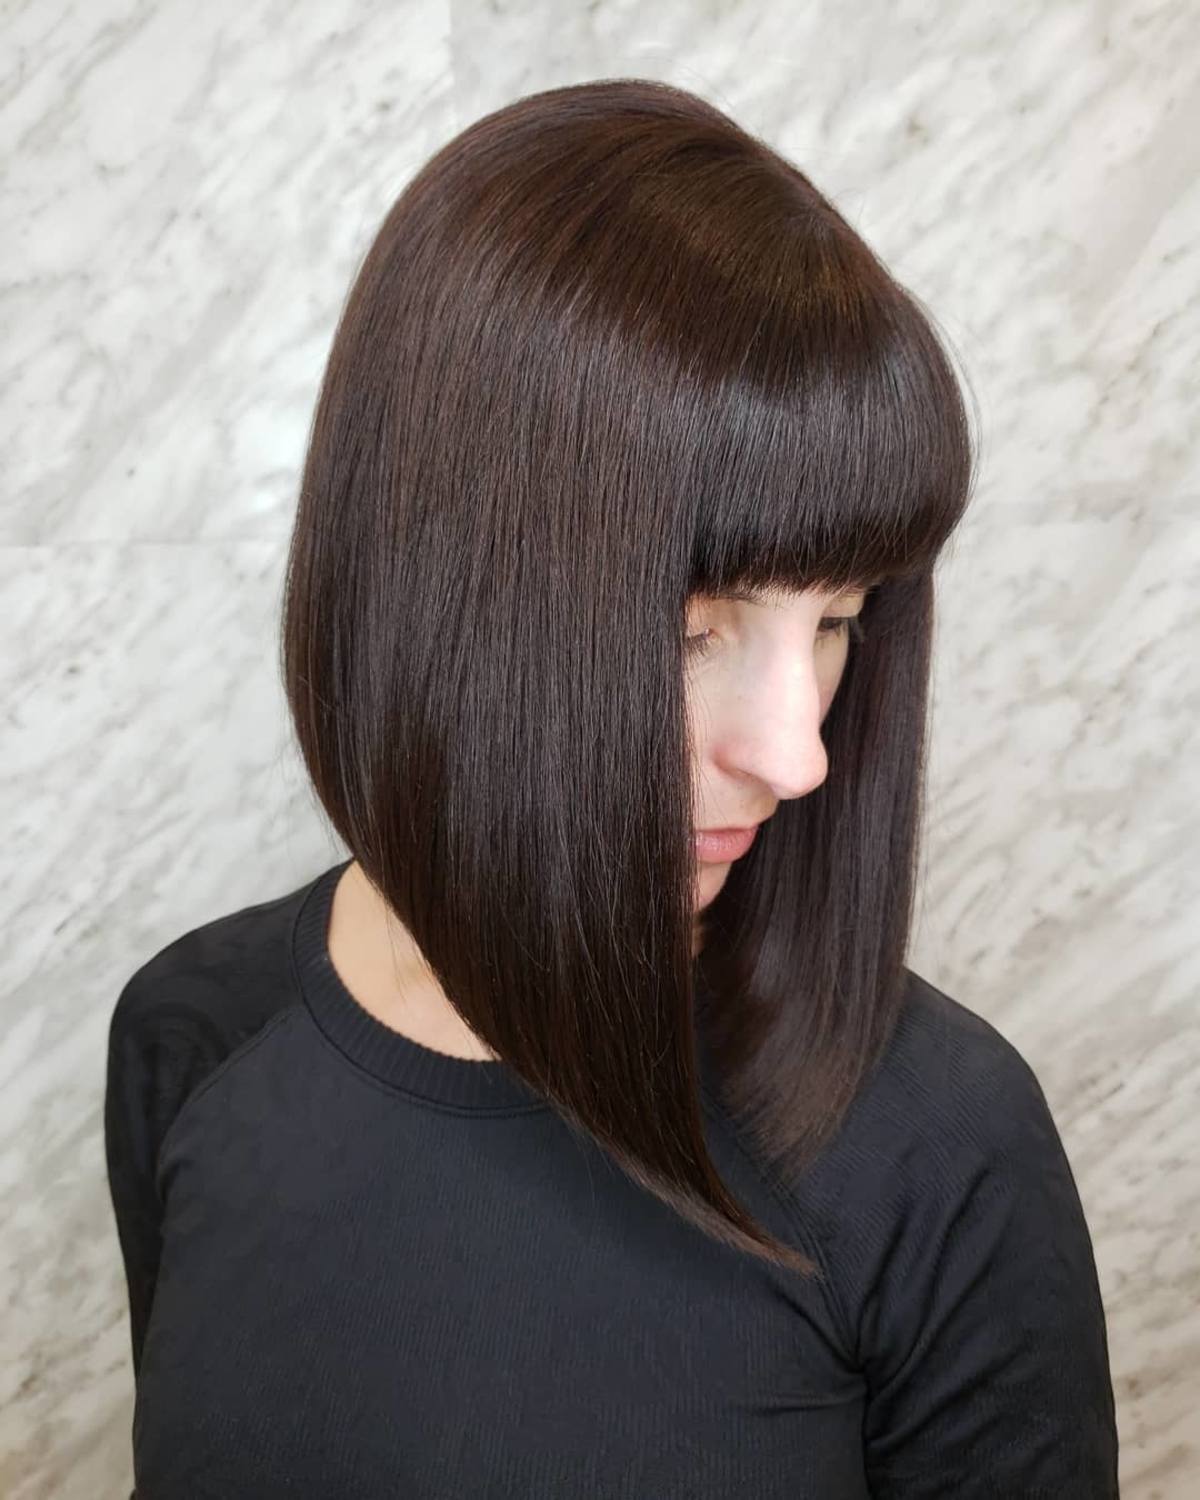 Angled Lob with Bangs Hairstyle